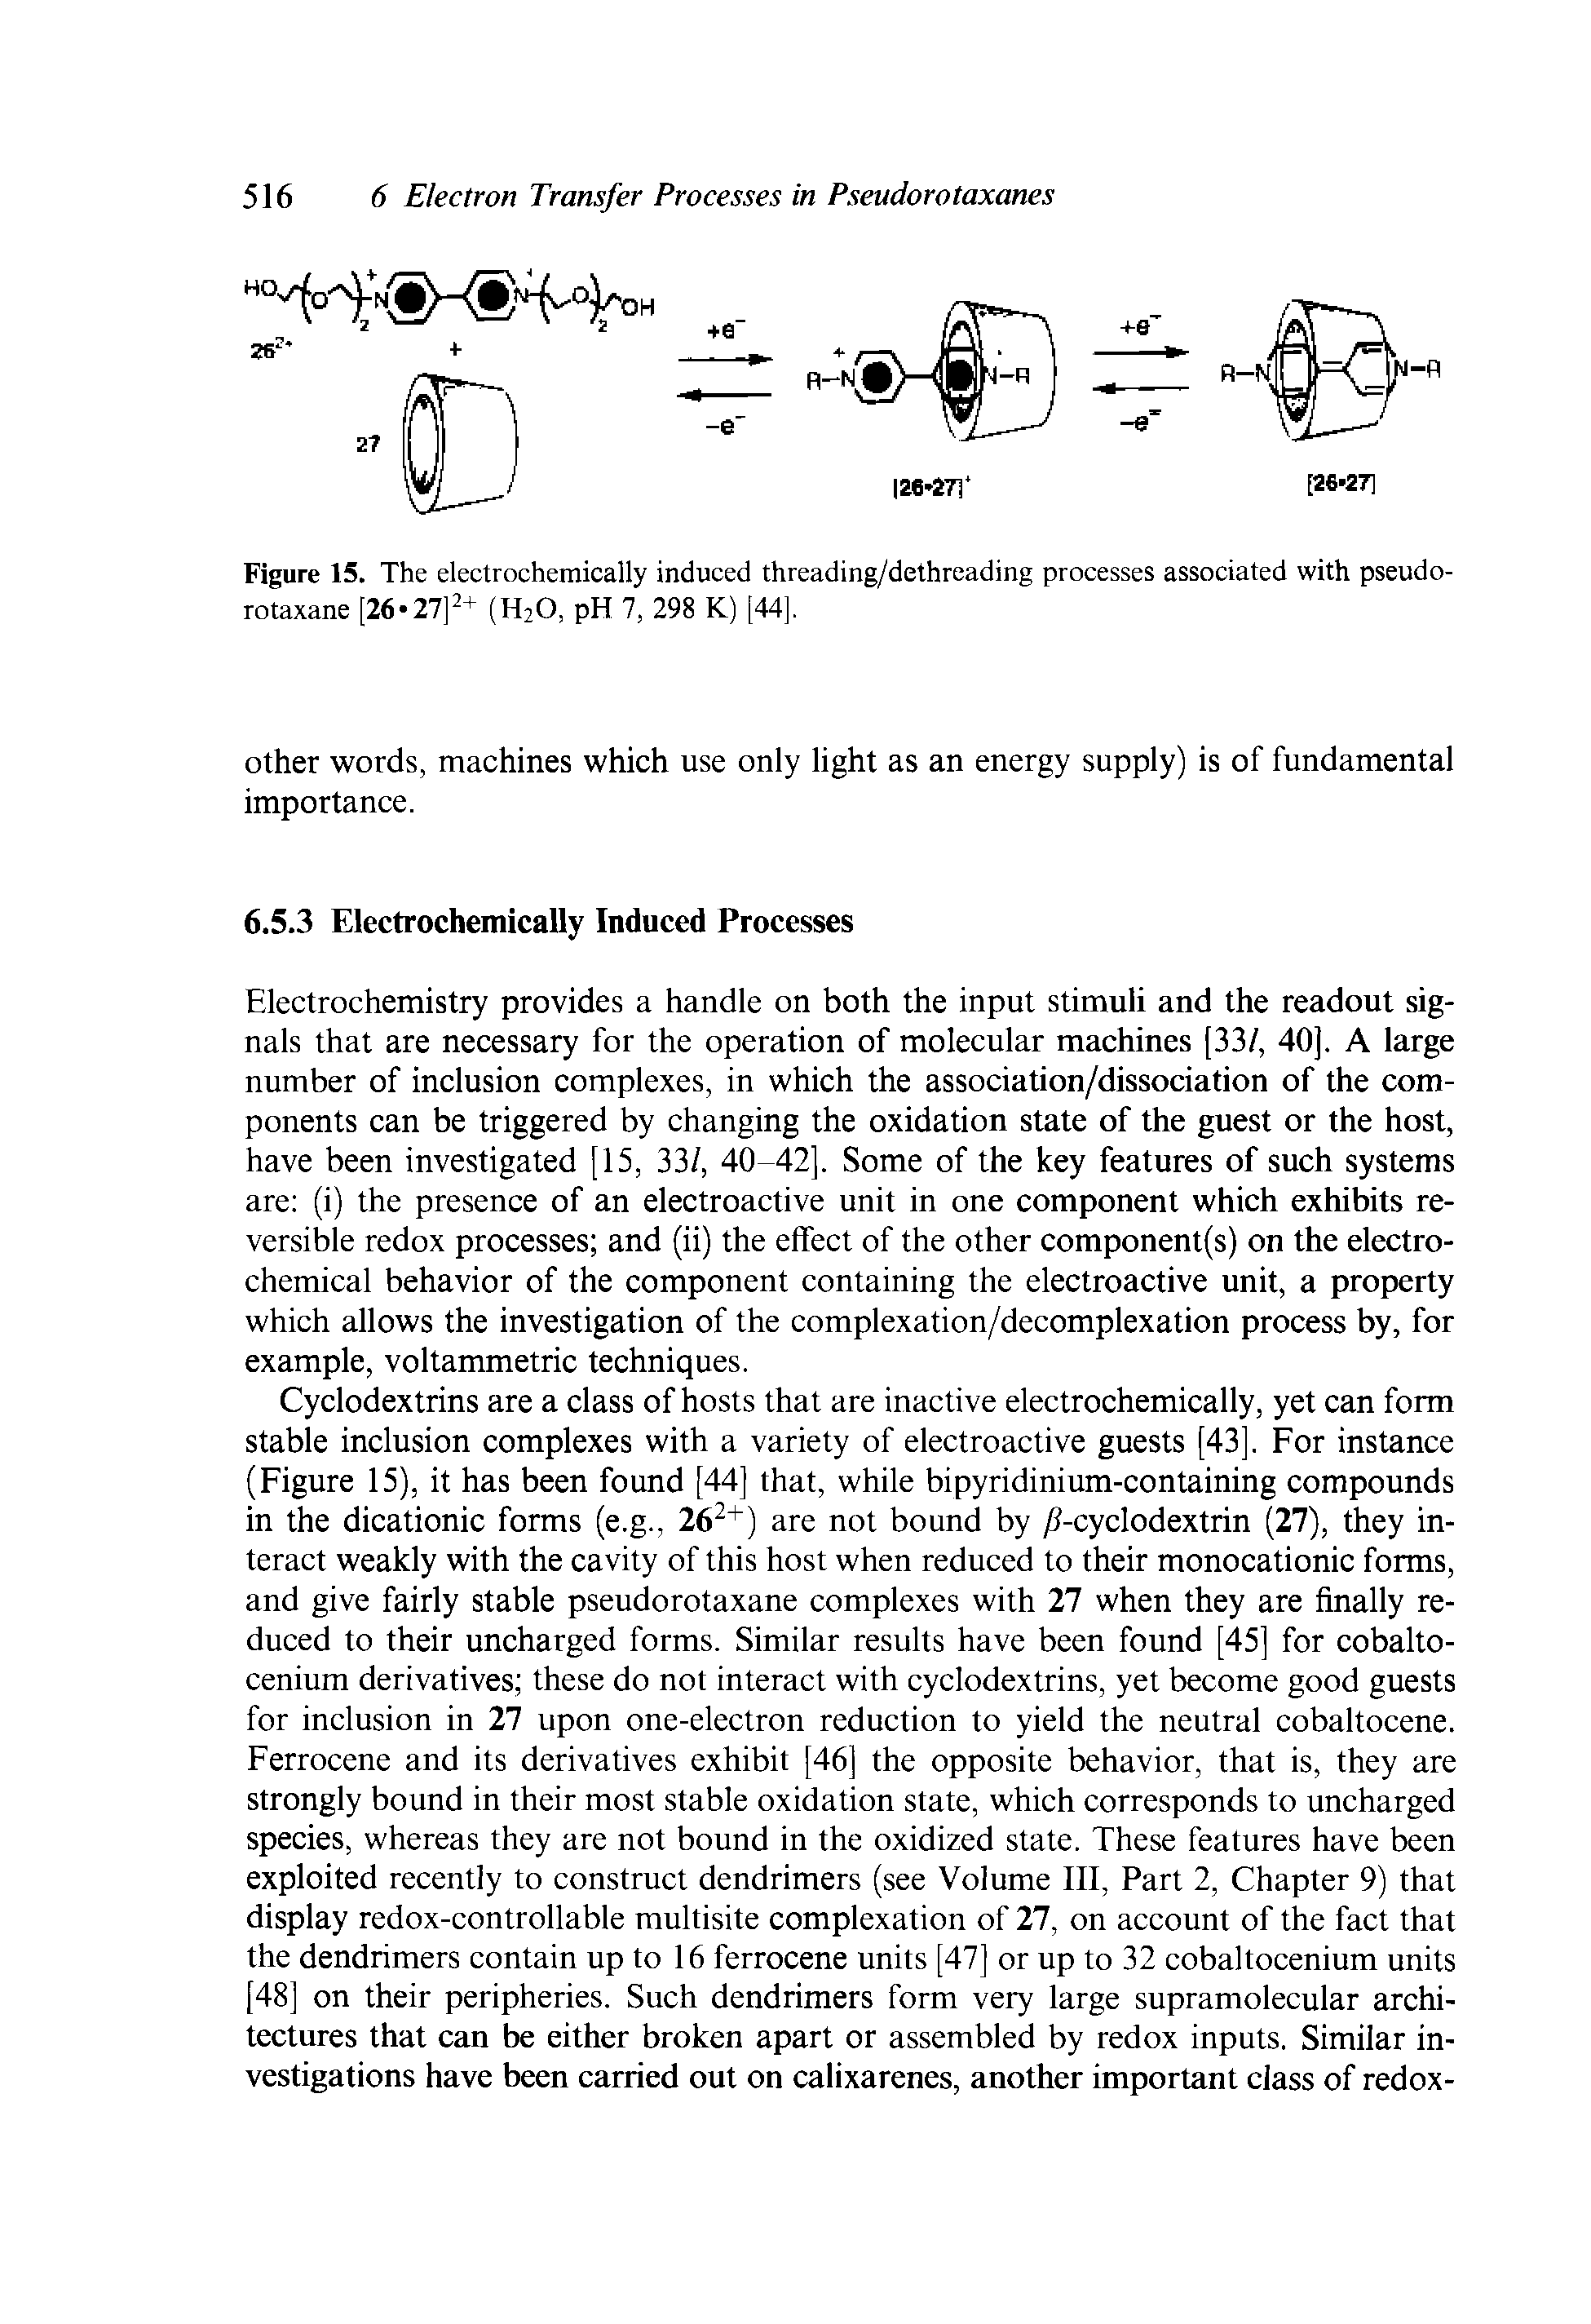 Figure 15. The electrochemically induced threading/dethreading processes associated with pseudo-rotaxane [26-27]2+ (HjO, pH 7, 298 K) [44],...